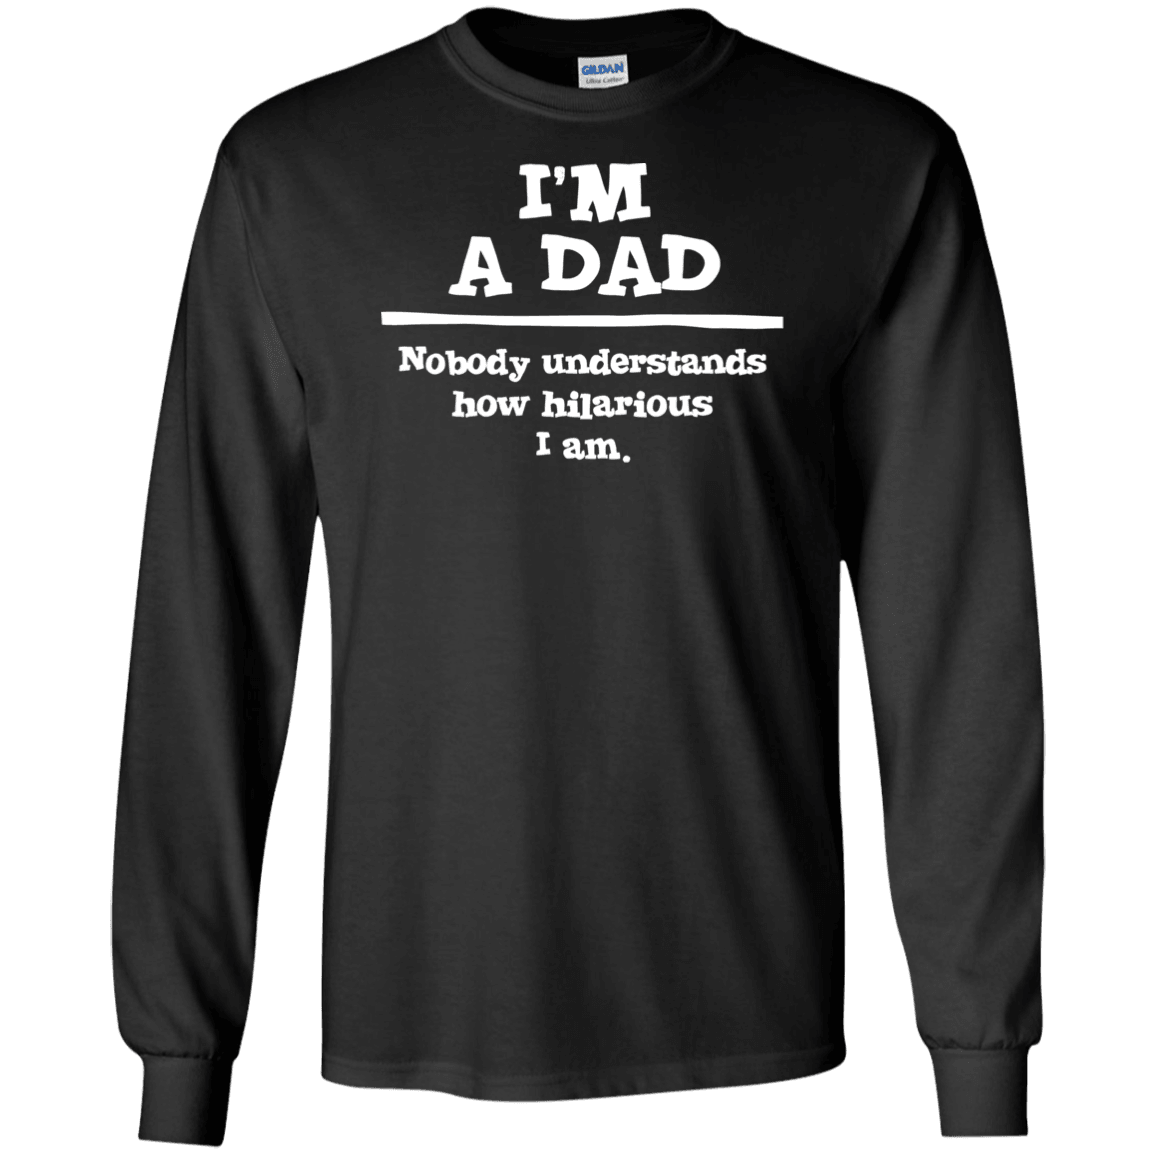 Designs by MyUtopia Shout Out:'I'm A Dad. Nobody understands how hilarious I am Long Sleeve Ultra Cotton T-Shirts,Black / S,Long Sleeve T-Shirts